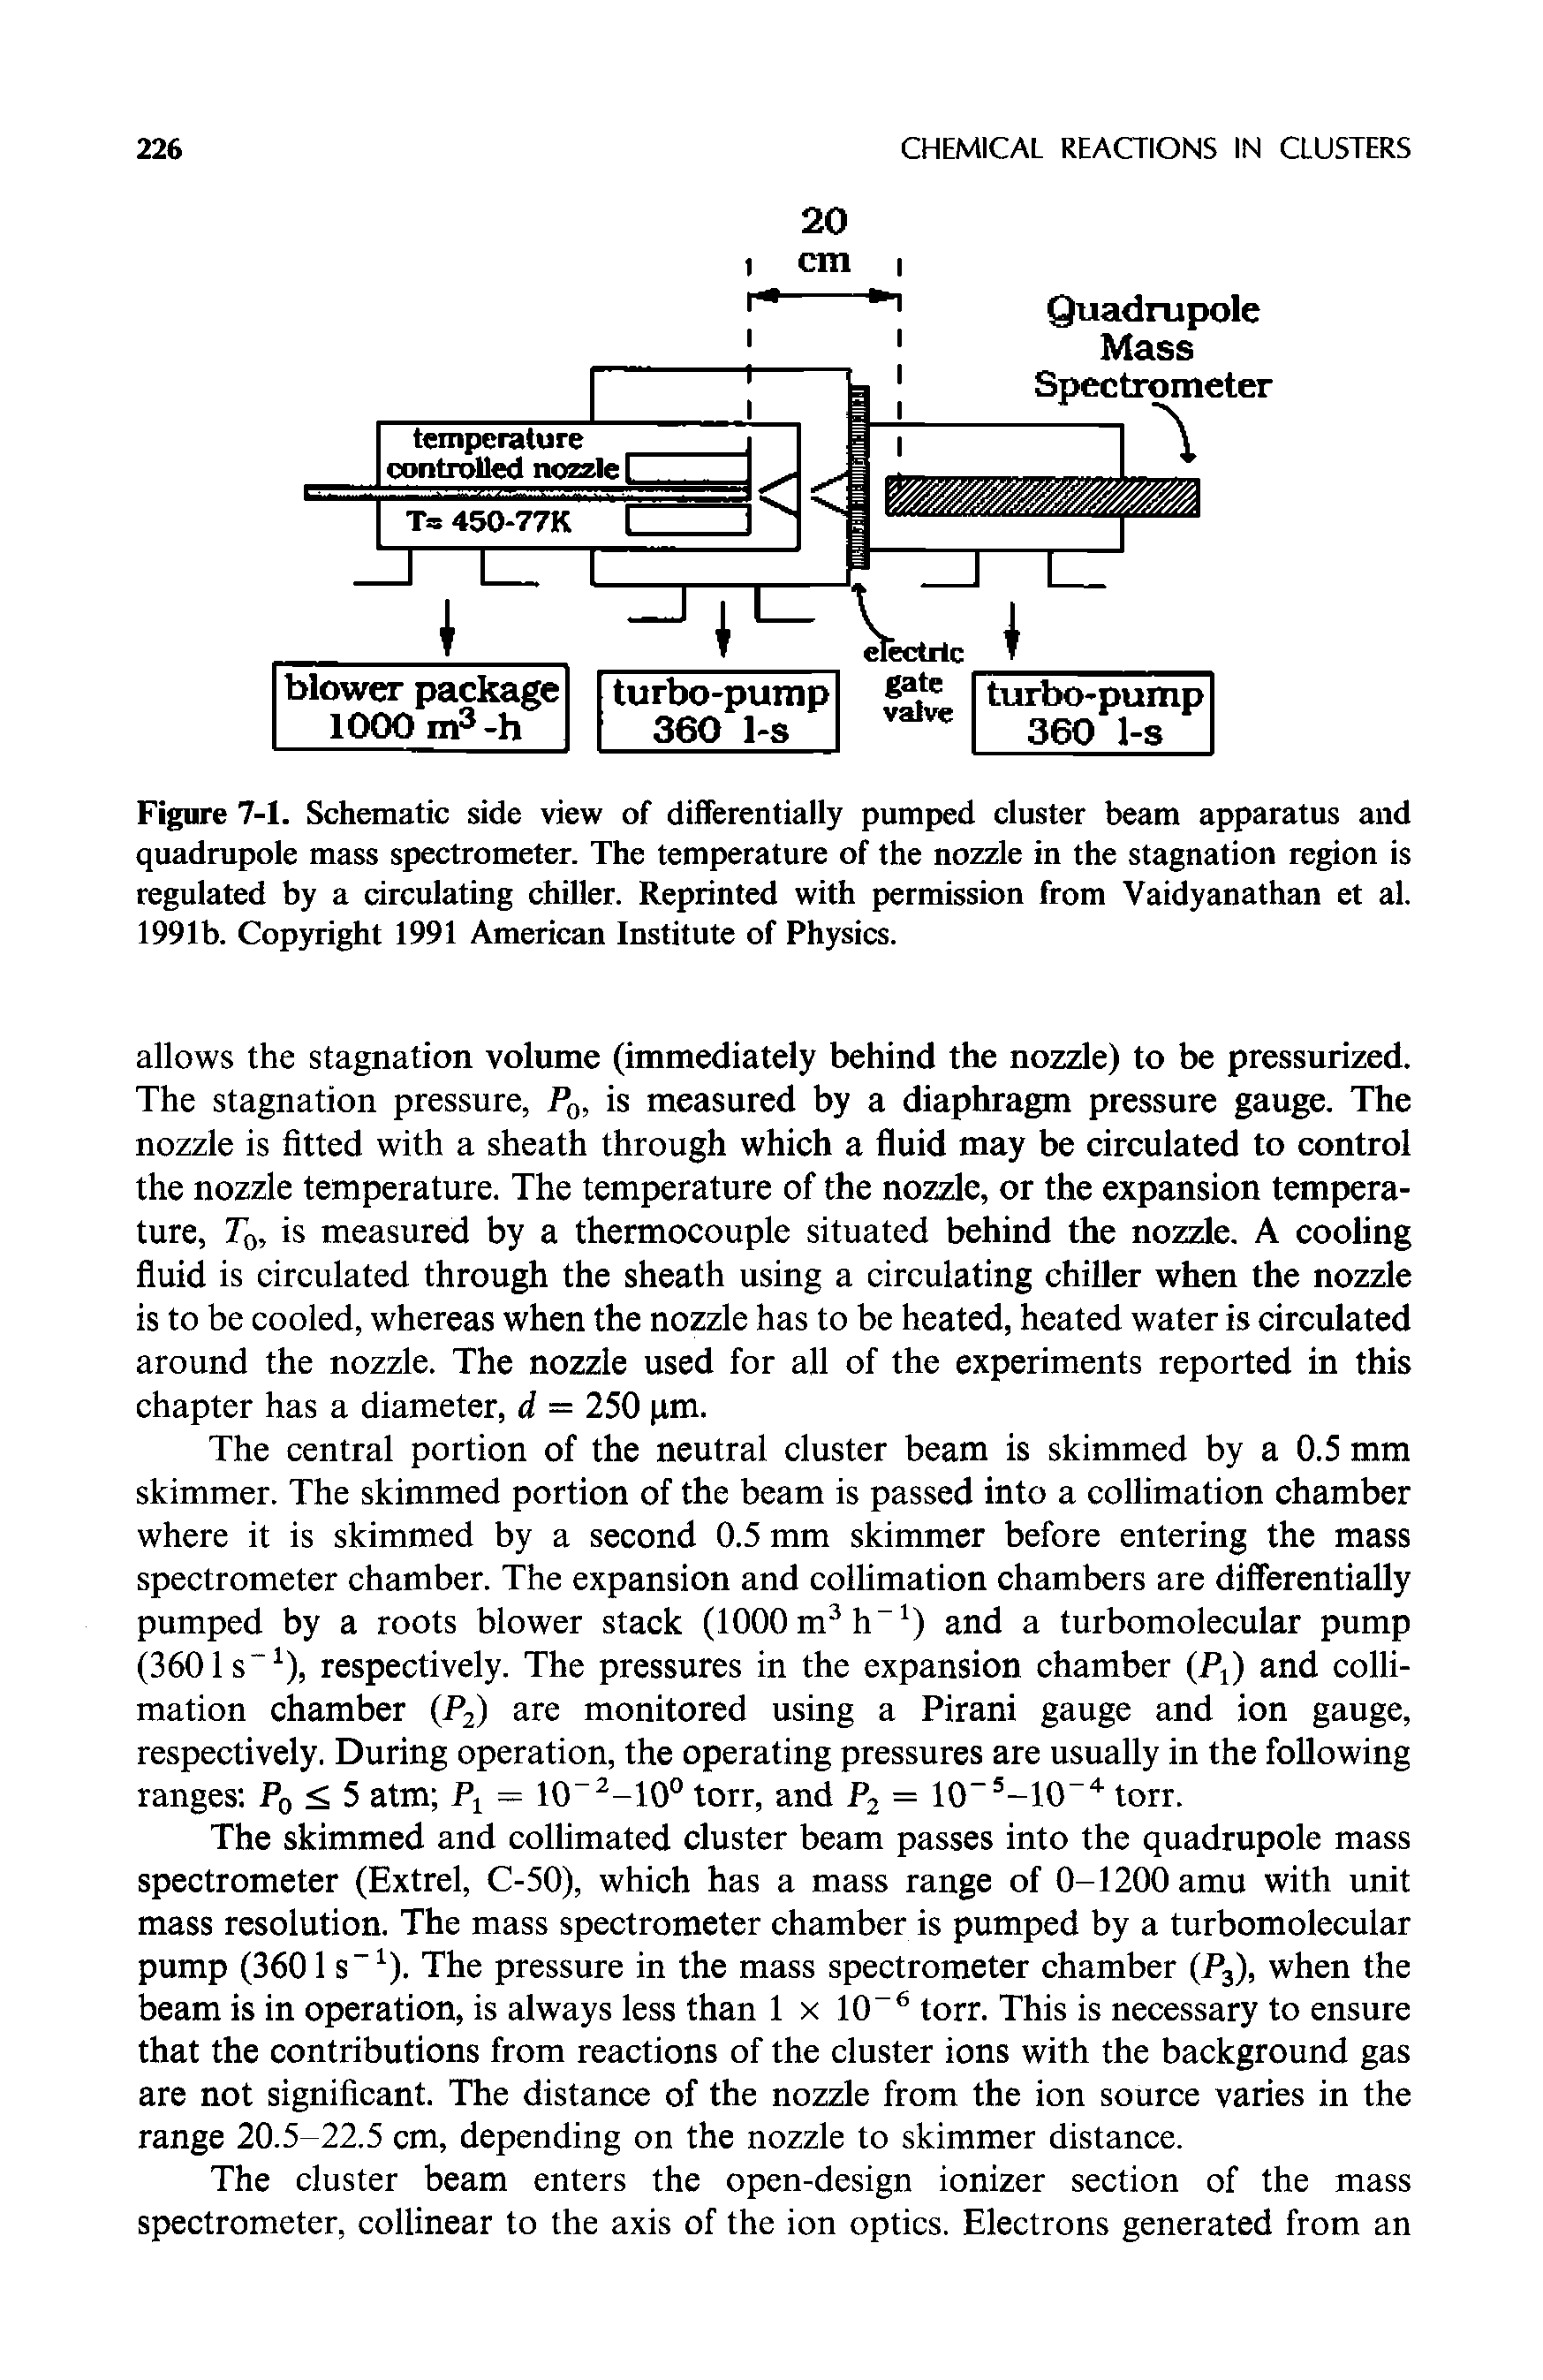 Figure 7-1. Schematic side view of differentially pumped cluster beam apparatus and quadrupole mass spectrometer. The temperature of the nozzle in the stagnation region is regulated by a circulating chiller. Reprinted with permission from Vaidyanathan et al. 1991b. Copyright 1991 American Institute of Physics.